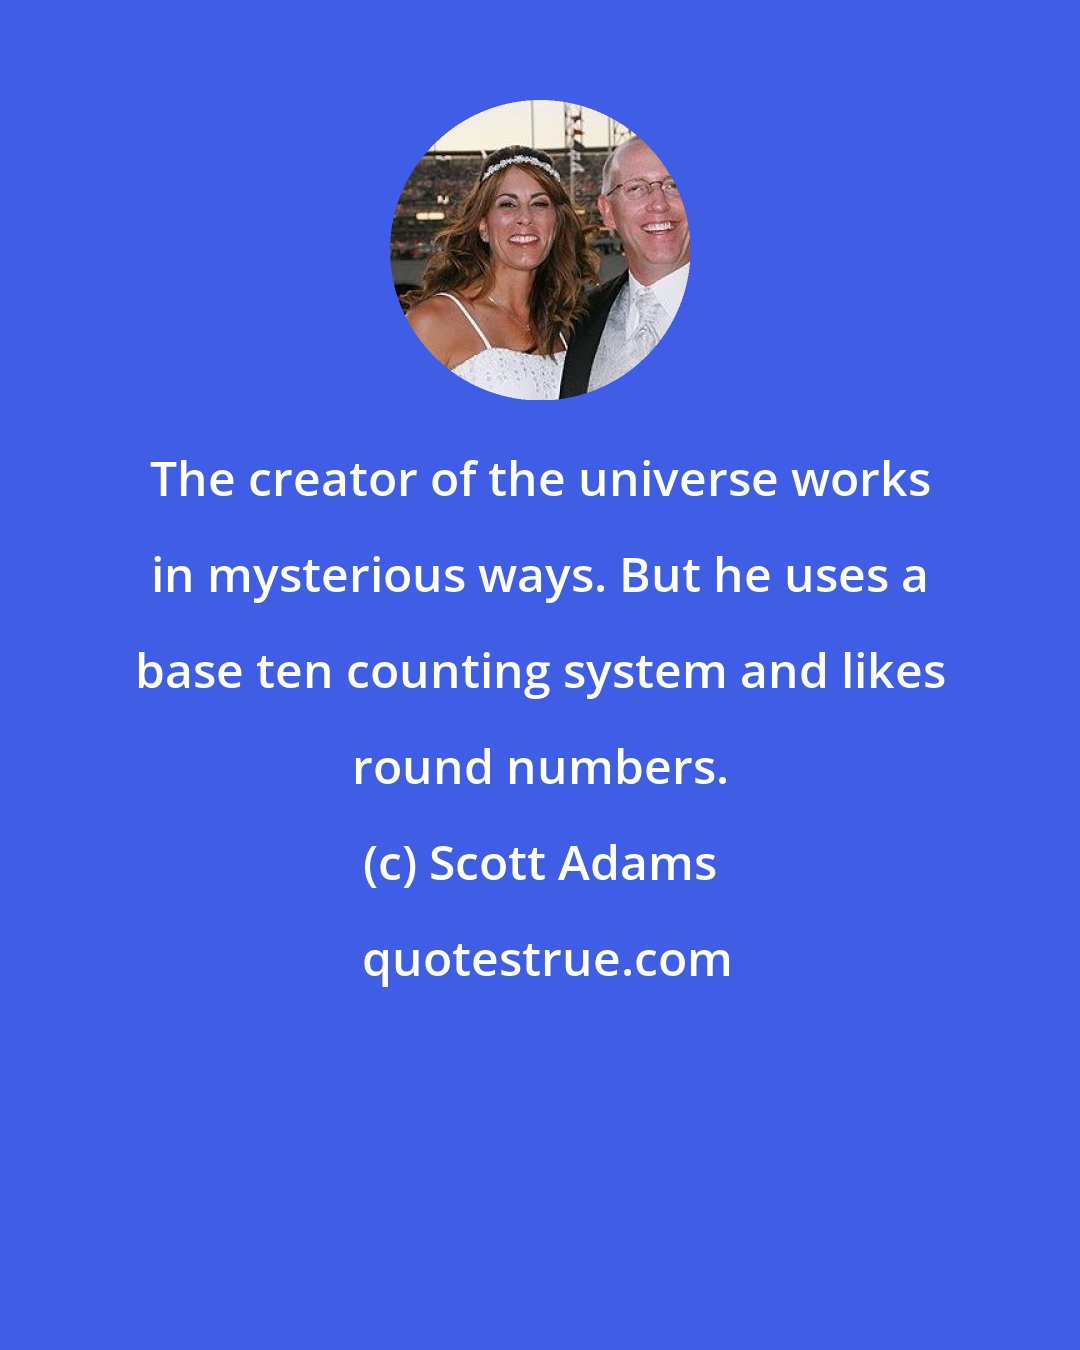 Scott Adams: The creator of the universe works in mysterious ways. But he uses a base ten counting system and likes round numbers.